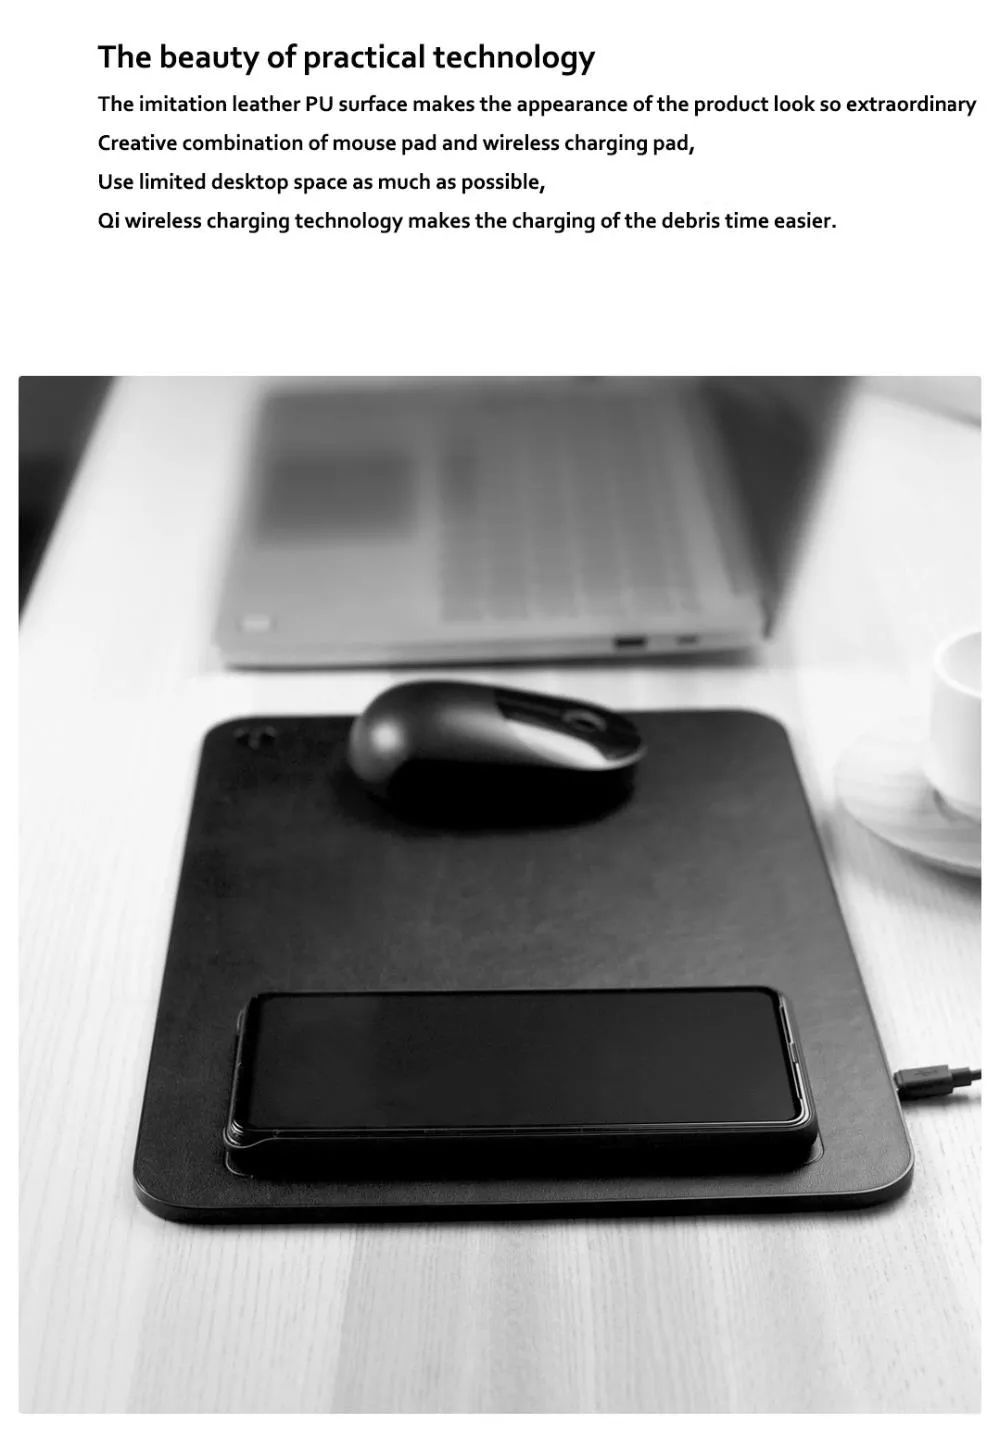 Xiaomi Miiiw Qi Wireless Charger Pu Leather Mouse Pad (6)